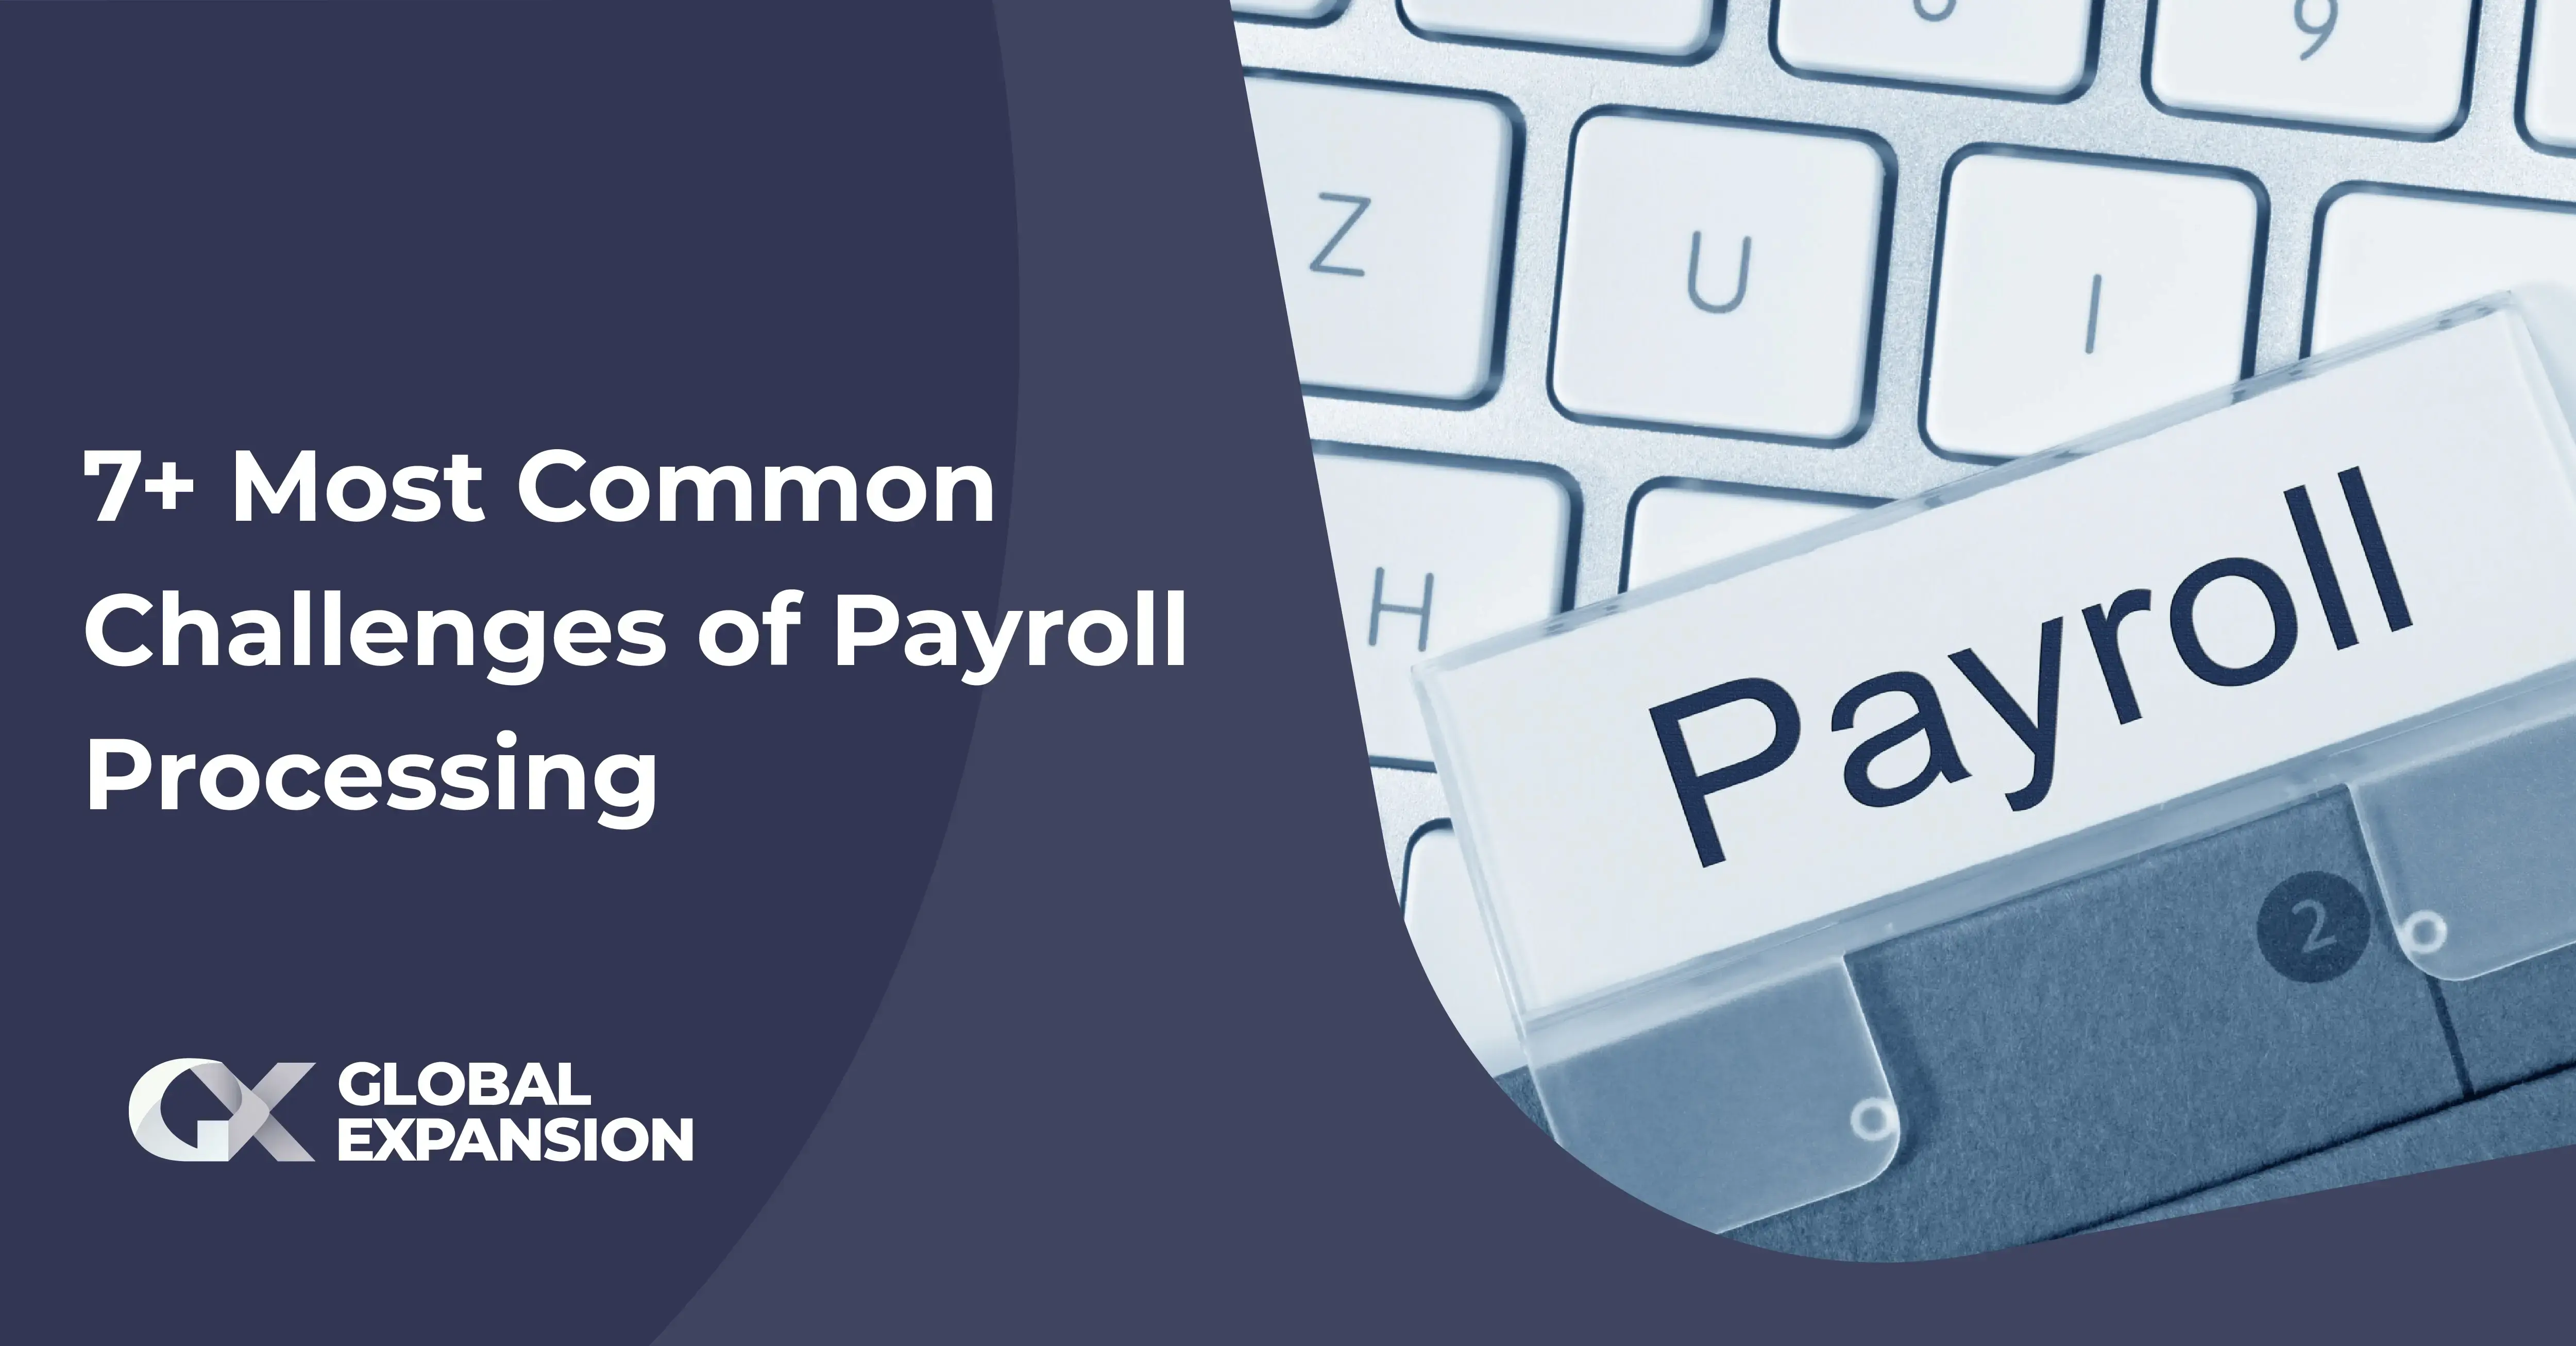 7+ Most Common Challenges of Payroll Processing